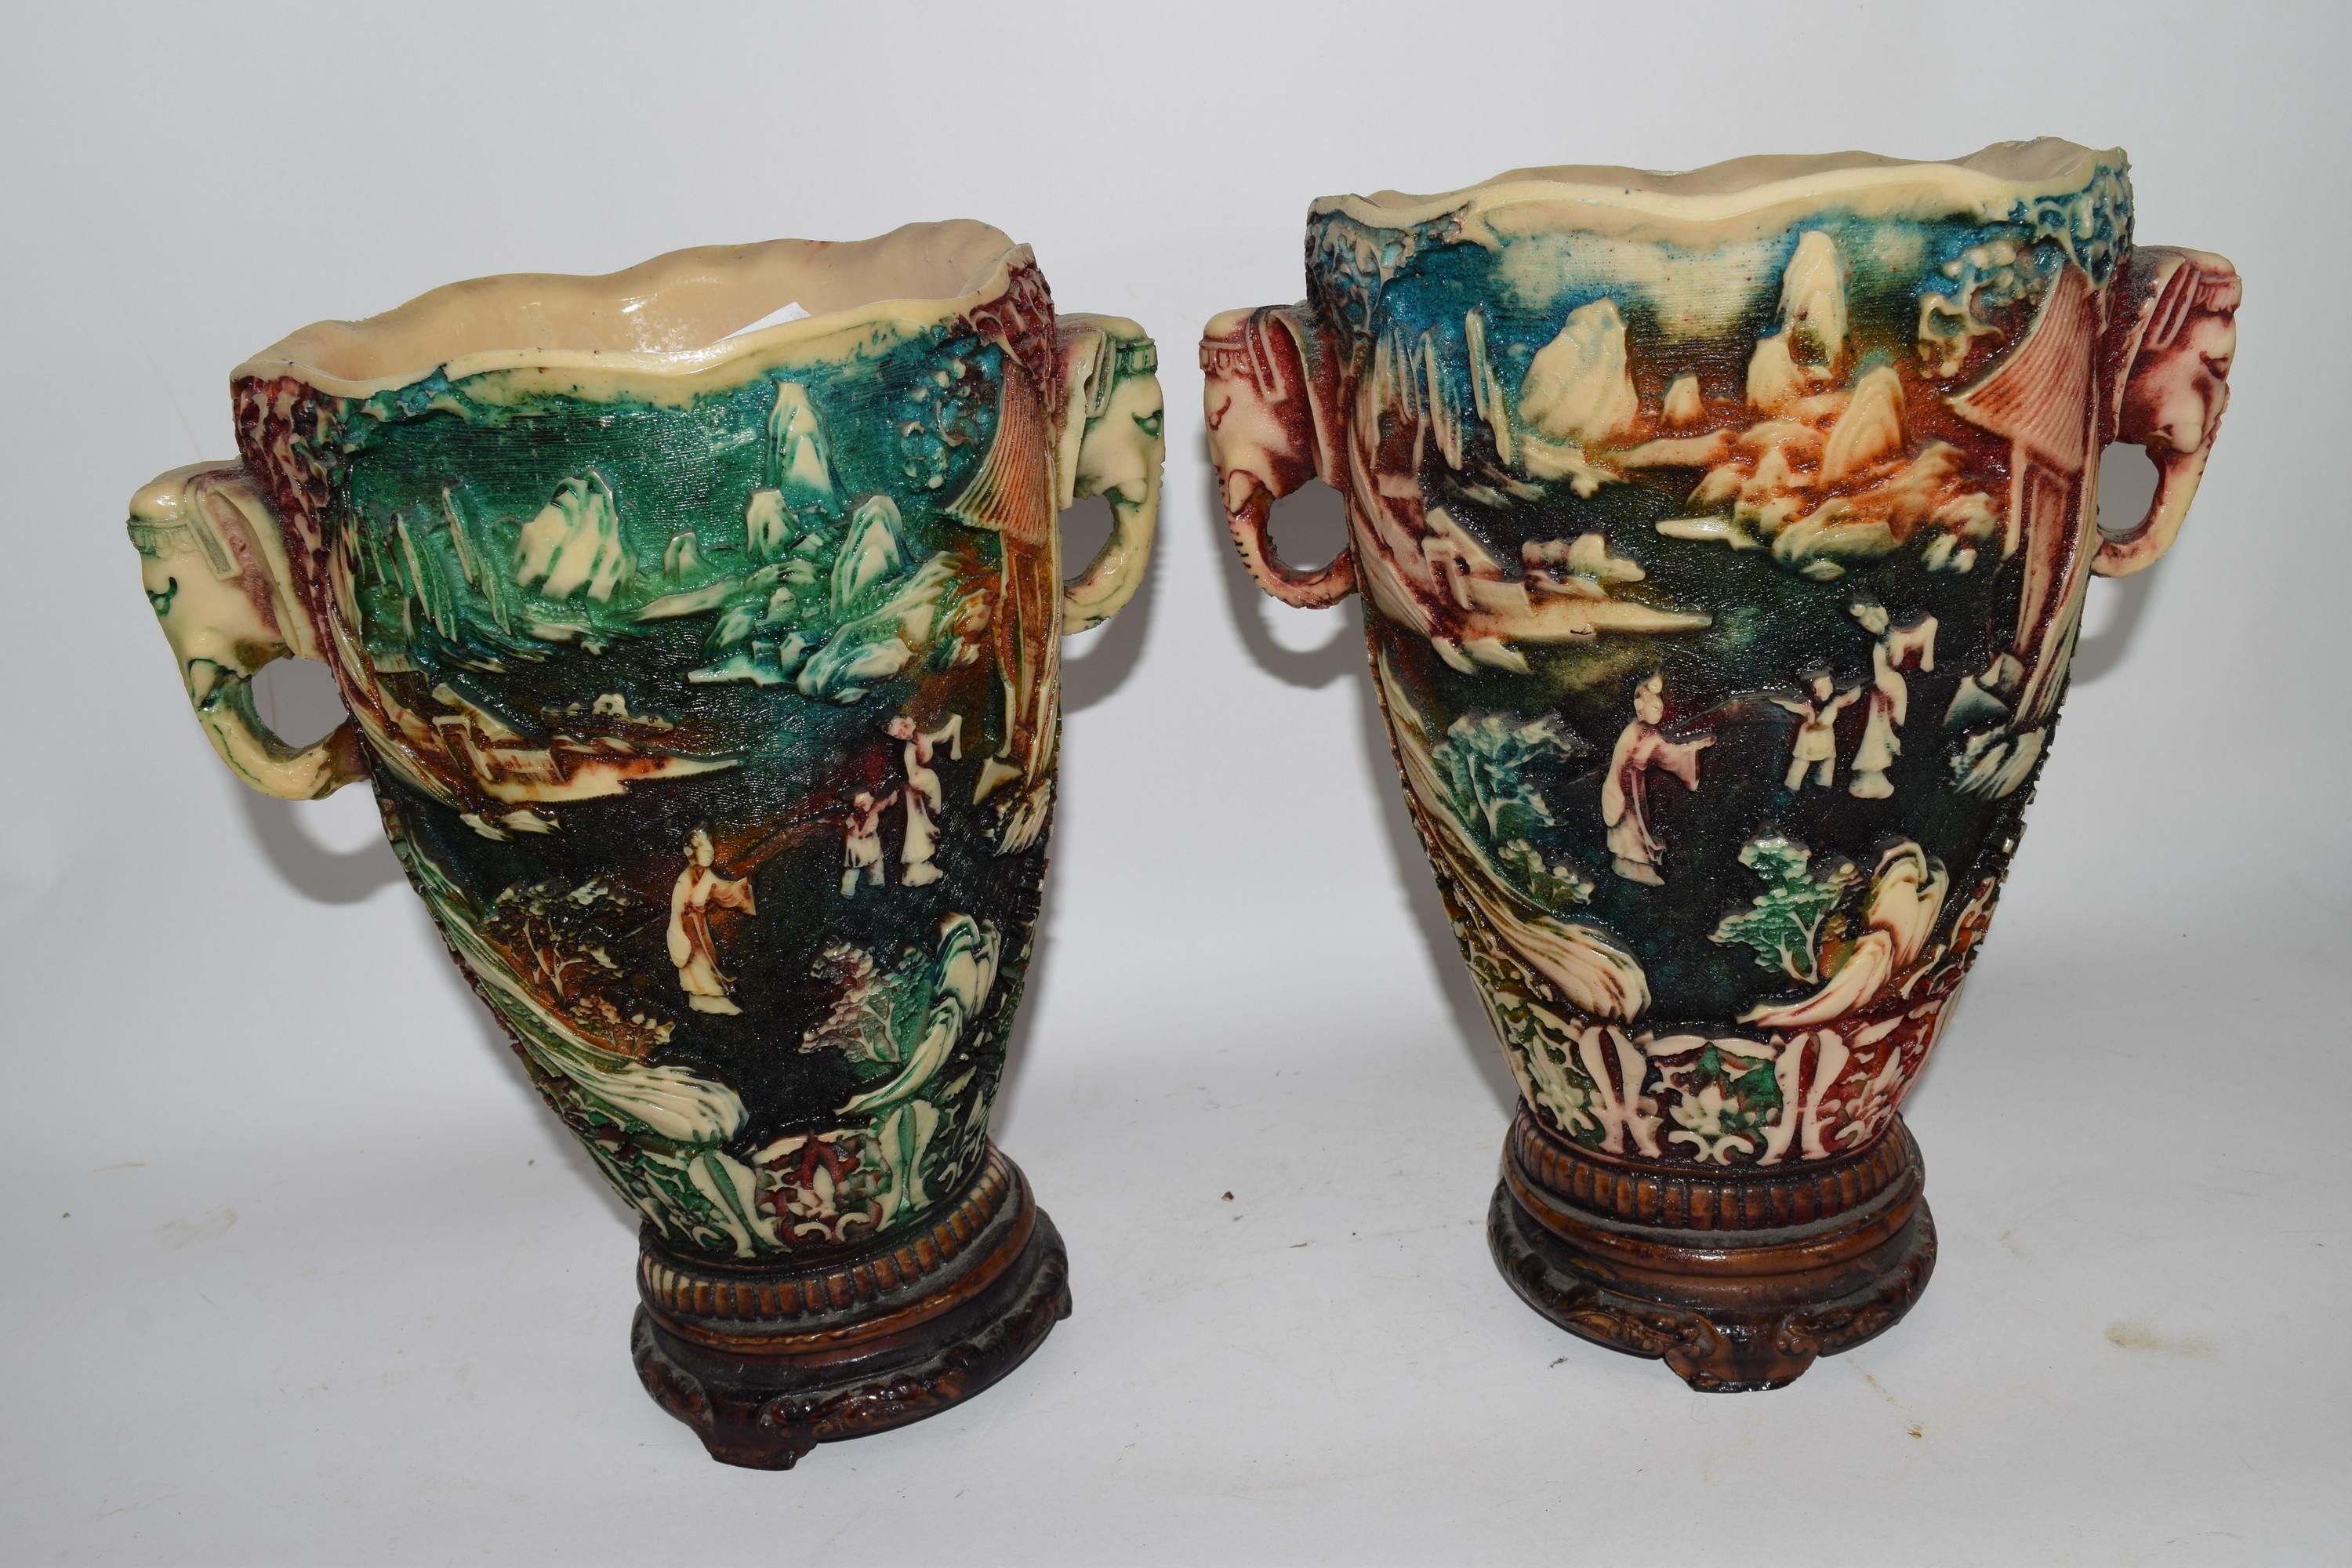 PAIR OF POTTERY VASES WITH ELEPHANT HANDLES - Image 2 of 2